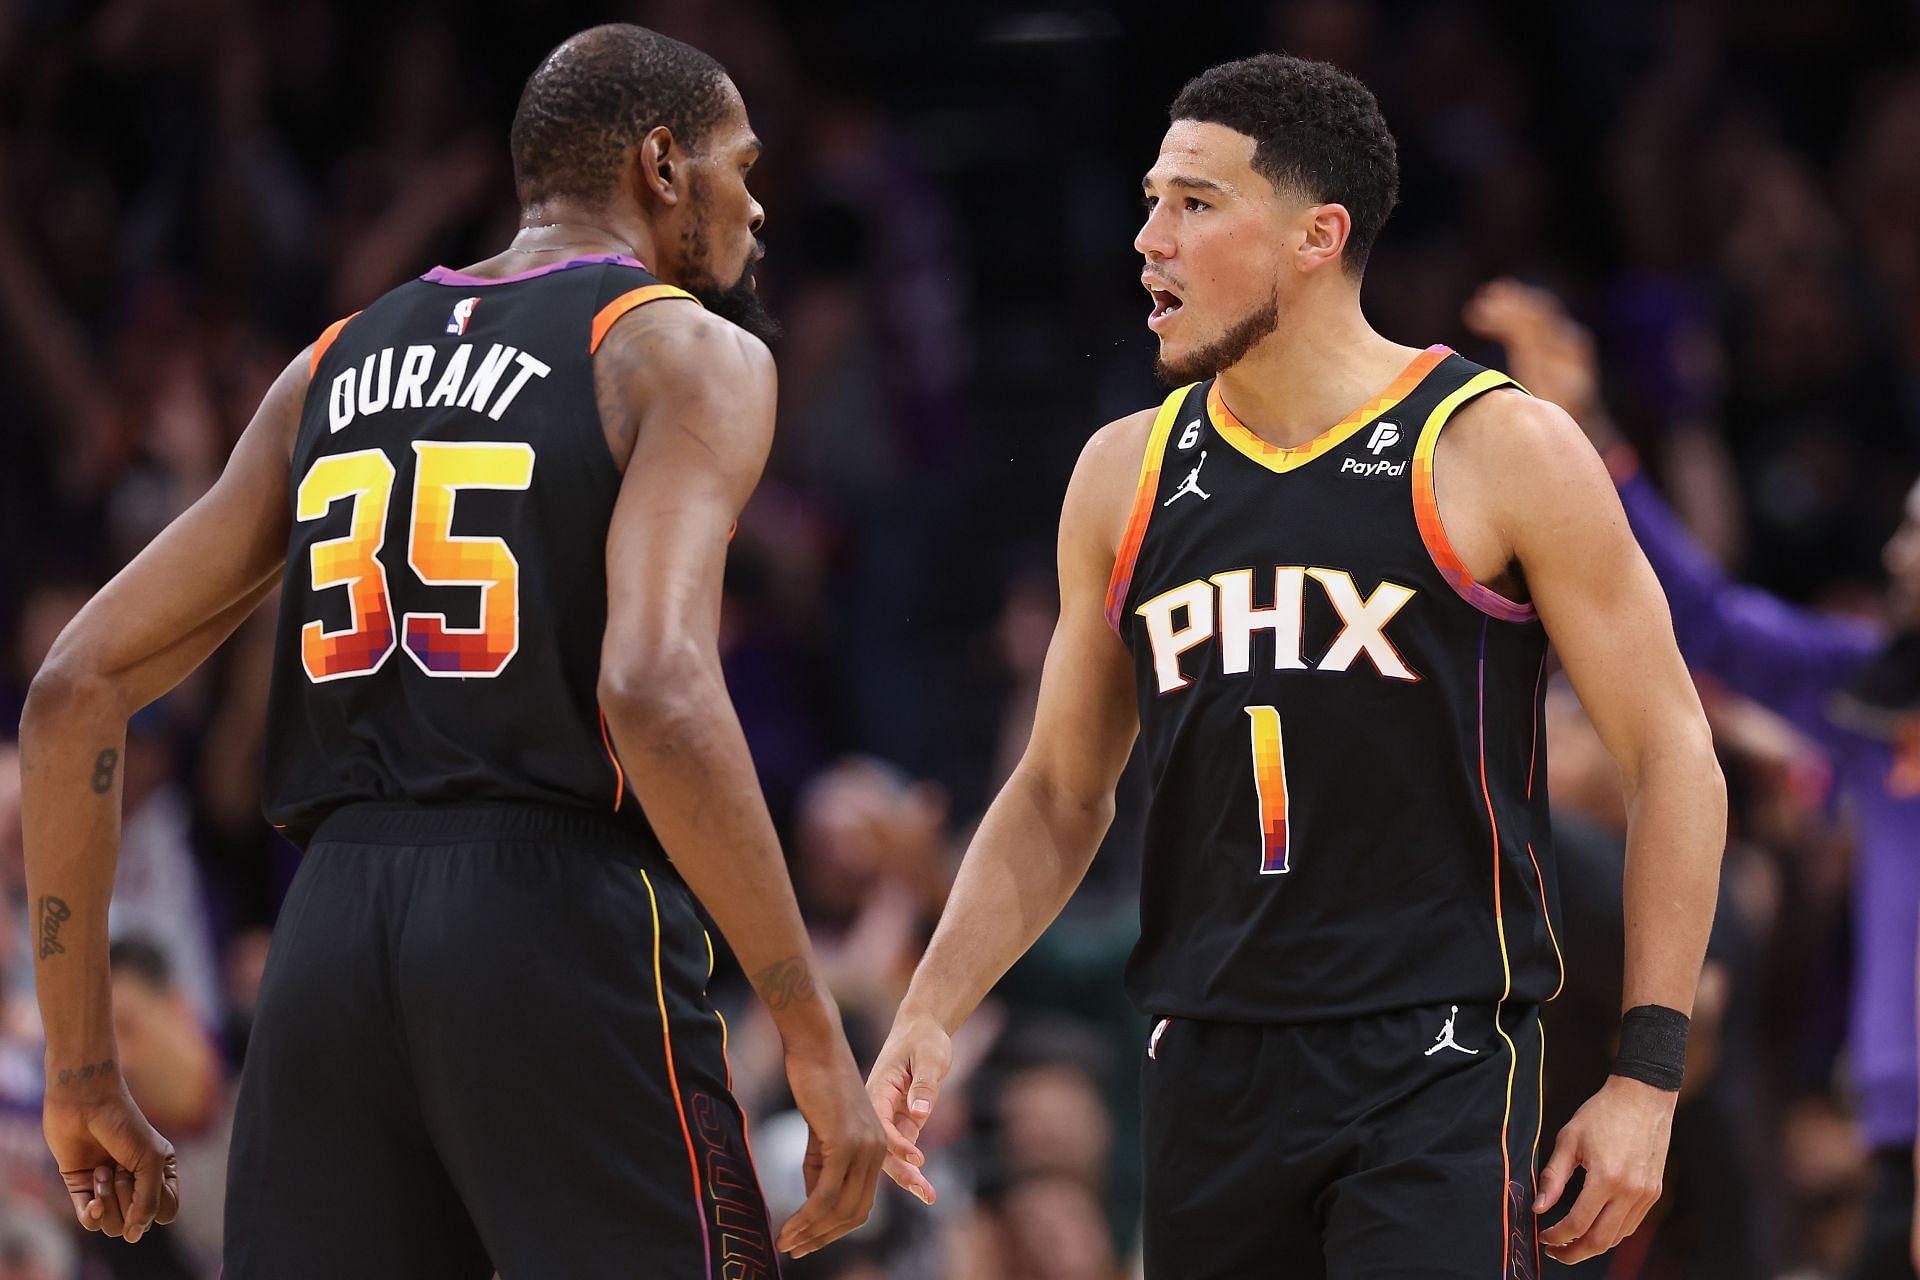 Kevin Durant and Devin Booker of the Phoenix Suns